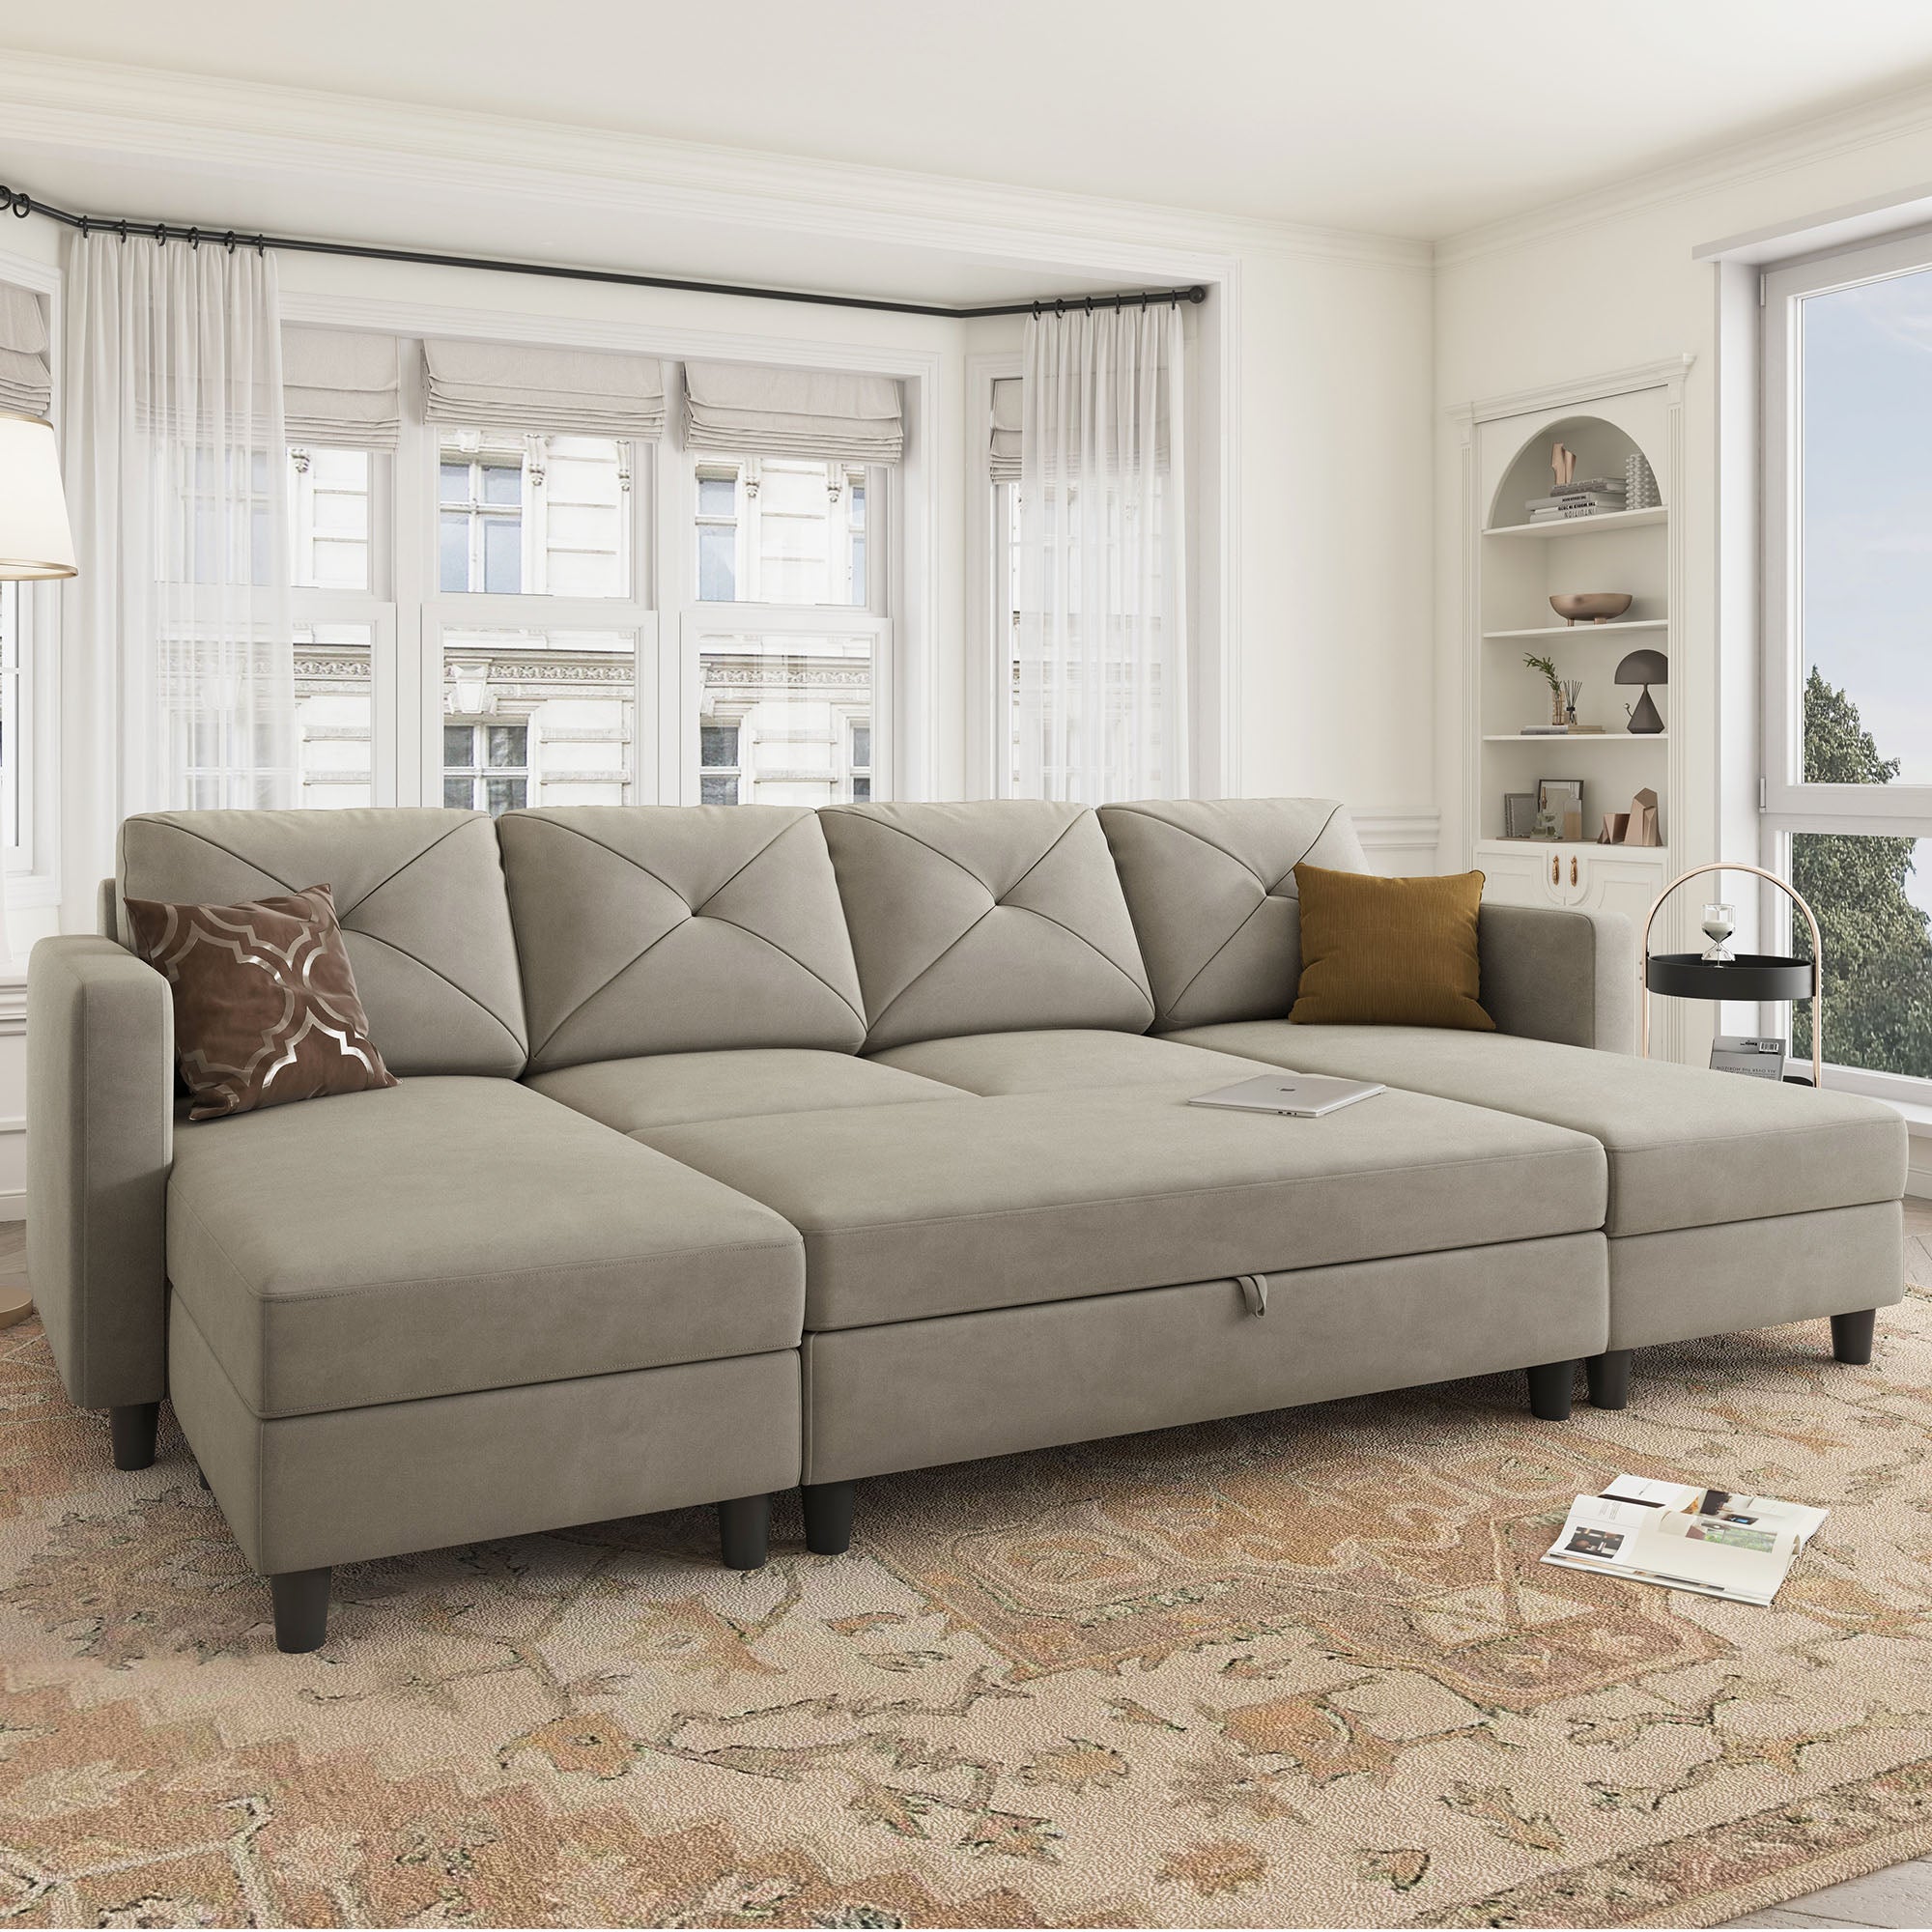 Velvet Convertible Sleeper Sectional With Storage Ottoman on a beautiful living room